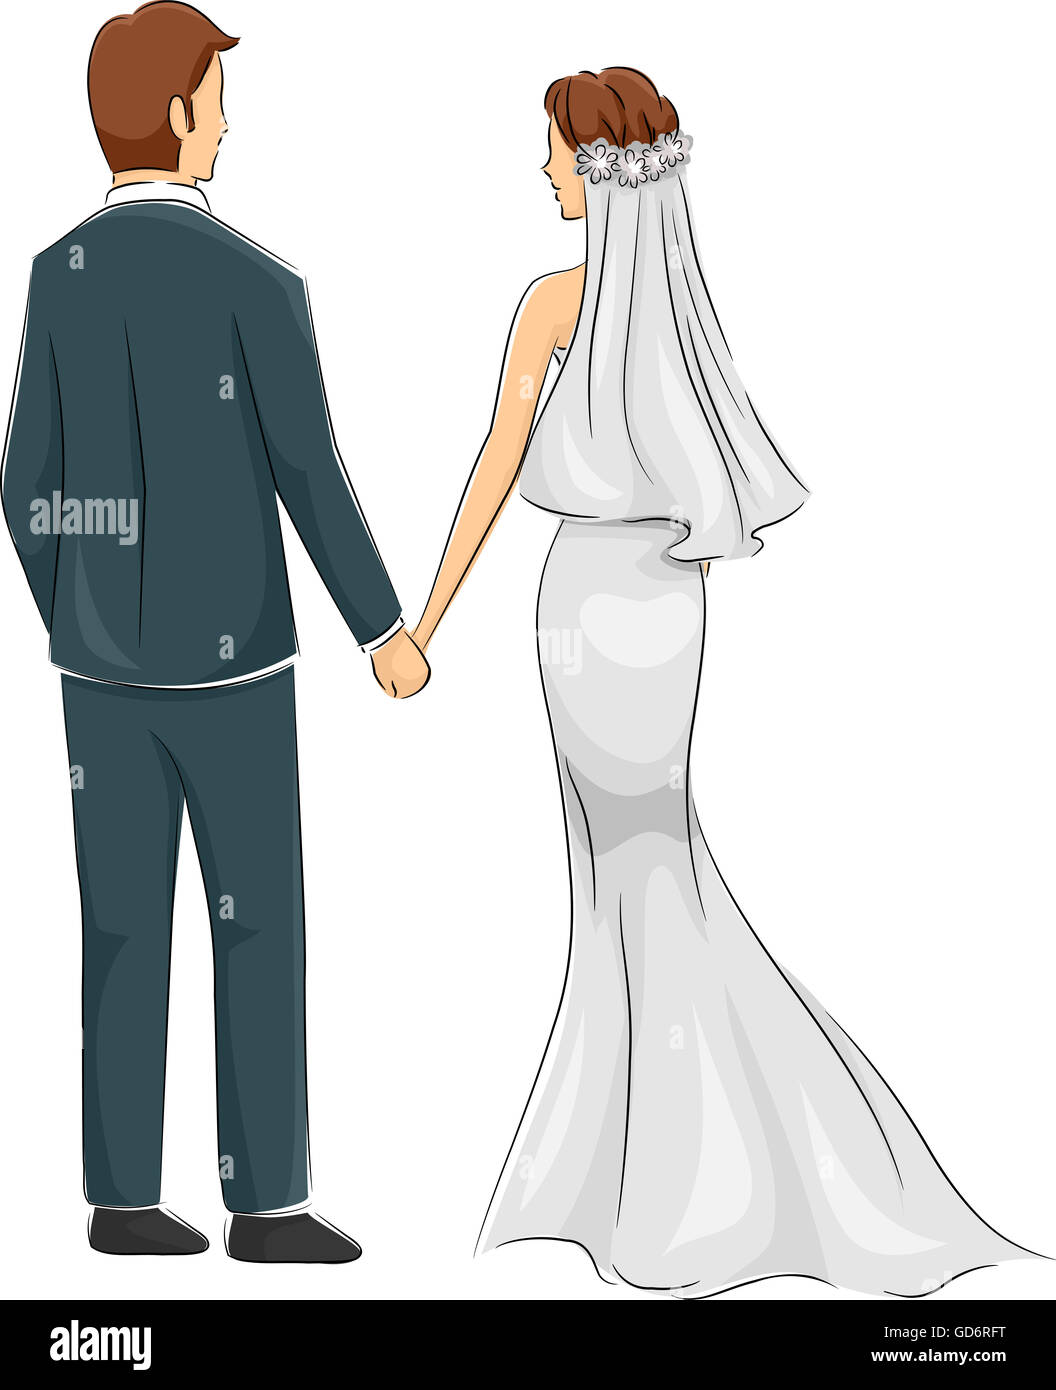 Back View Illustration of a Newly Married Couple Stock Photo